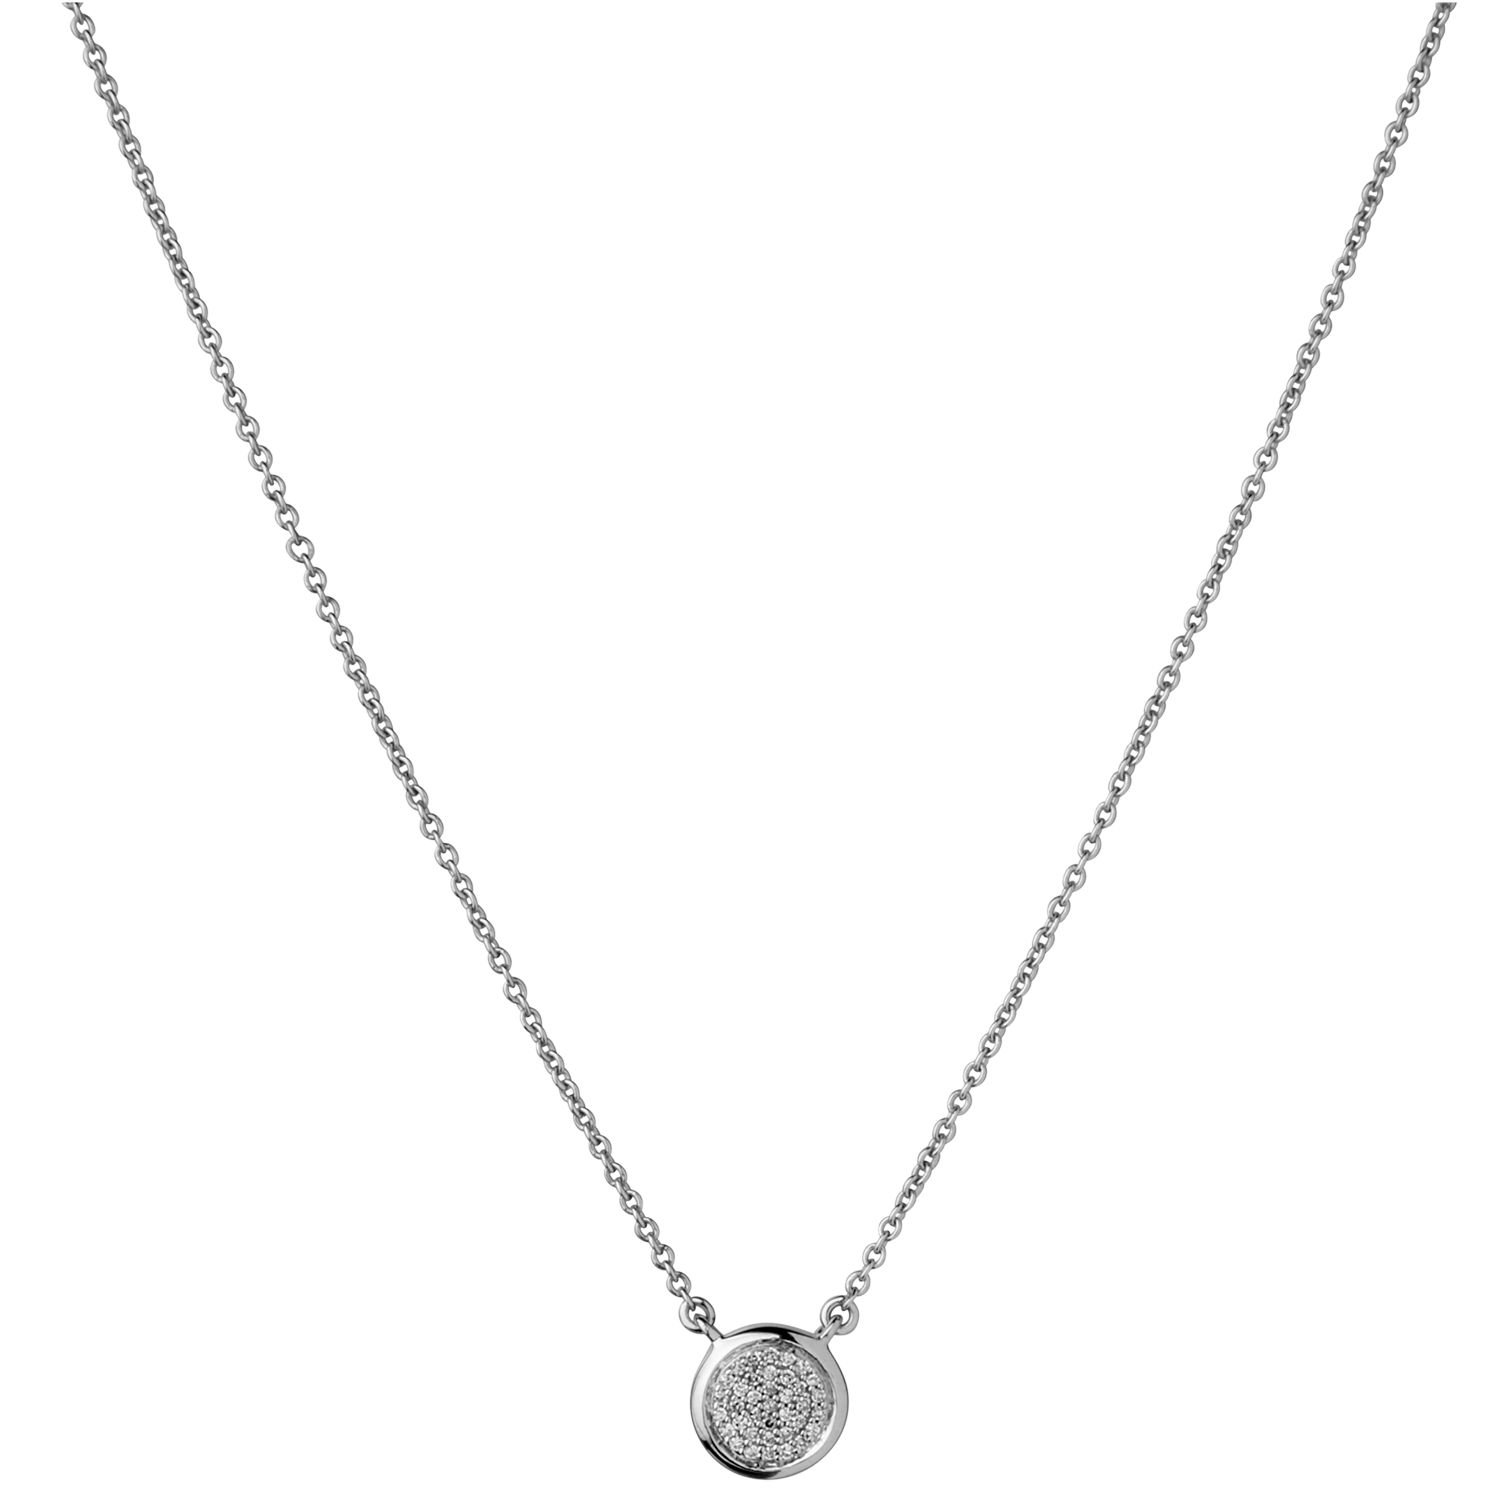 Links Of London Diamond Essentials Sterling Silver And Pave Round Pendant Necklace Silver At John Lewis Partners